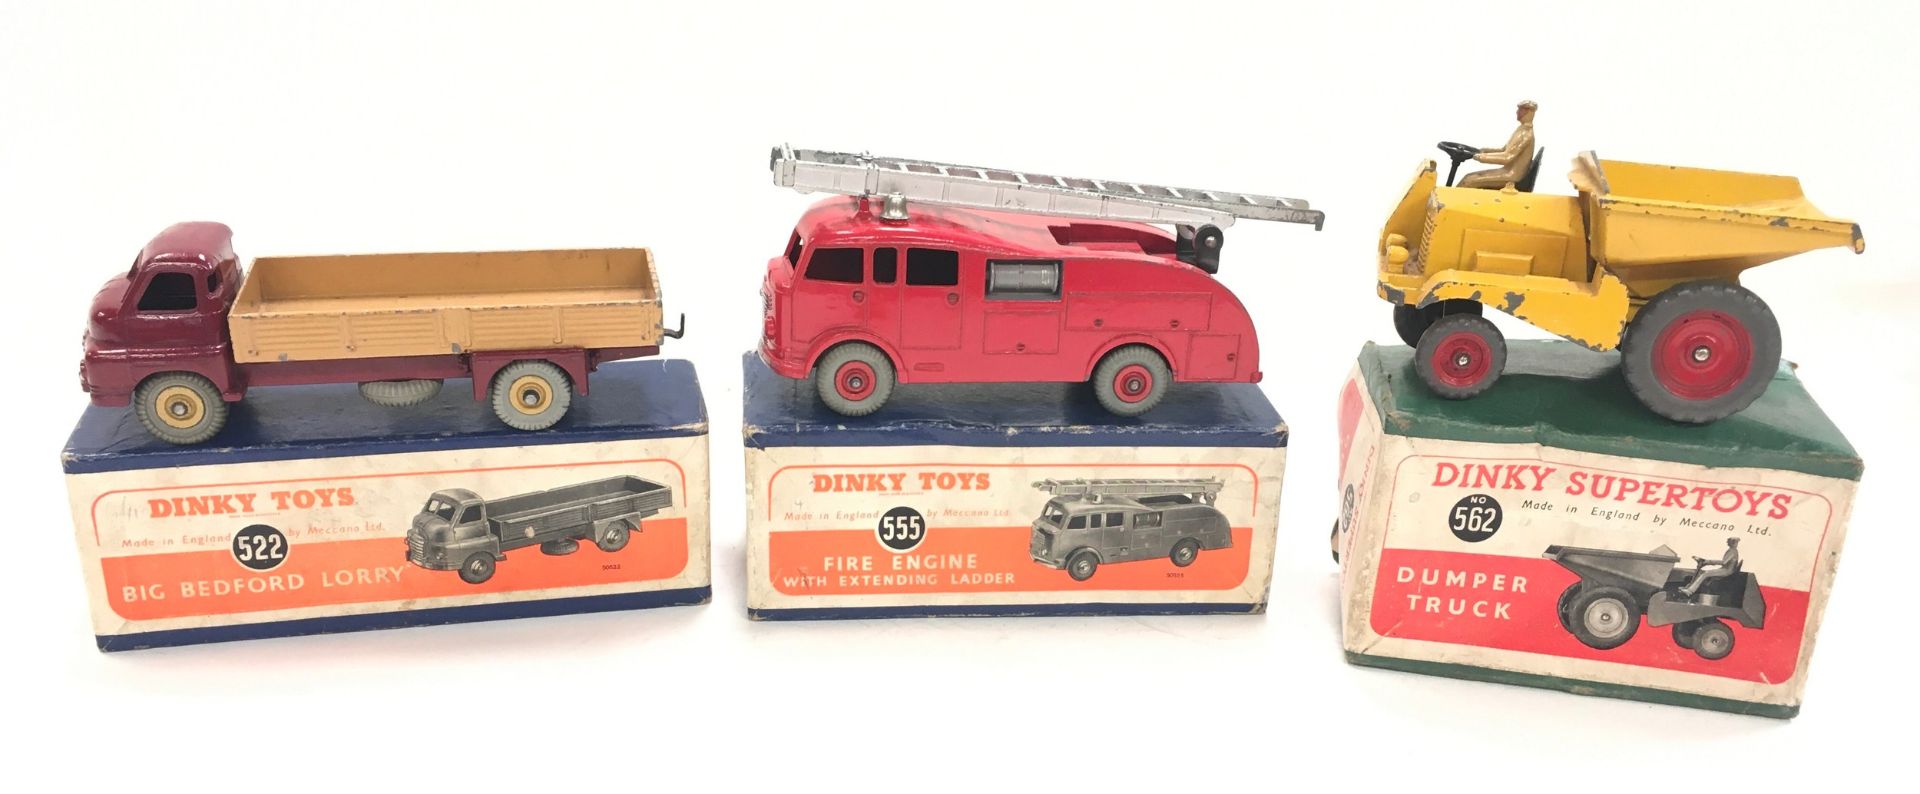 Dinky 555 Fire Engine with Extending ladder - Good, Dinky 522 Big Bedford Lorry maroon cab and